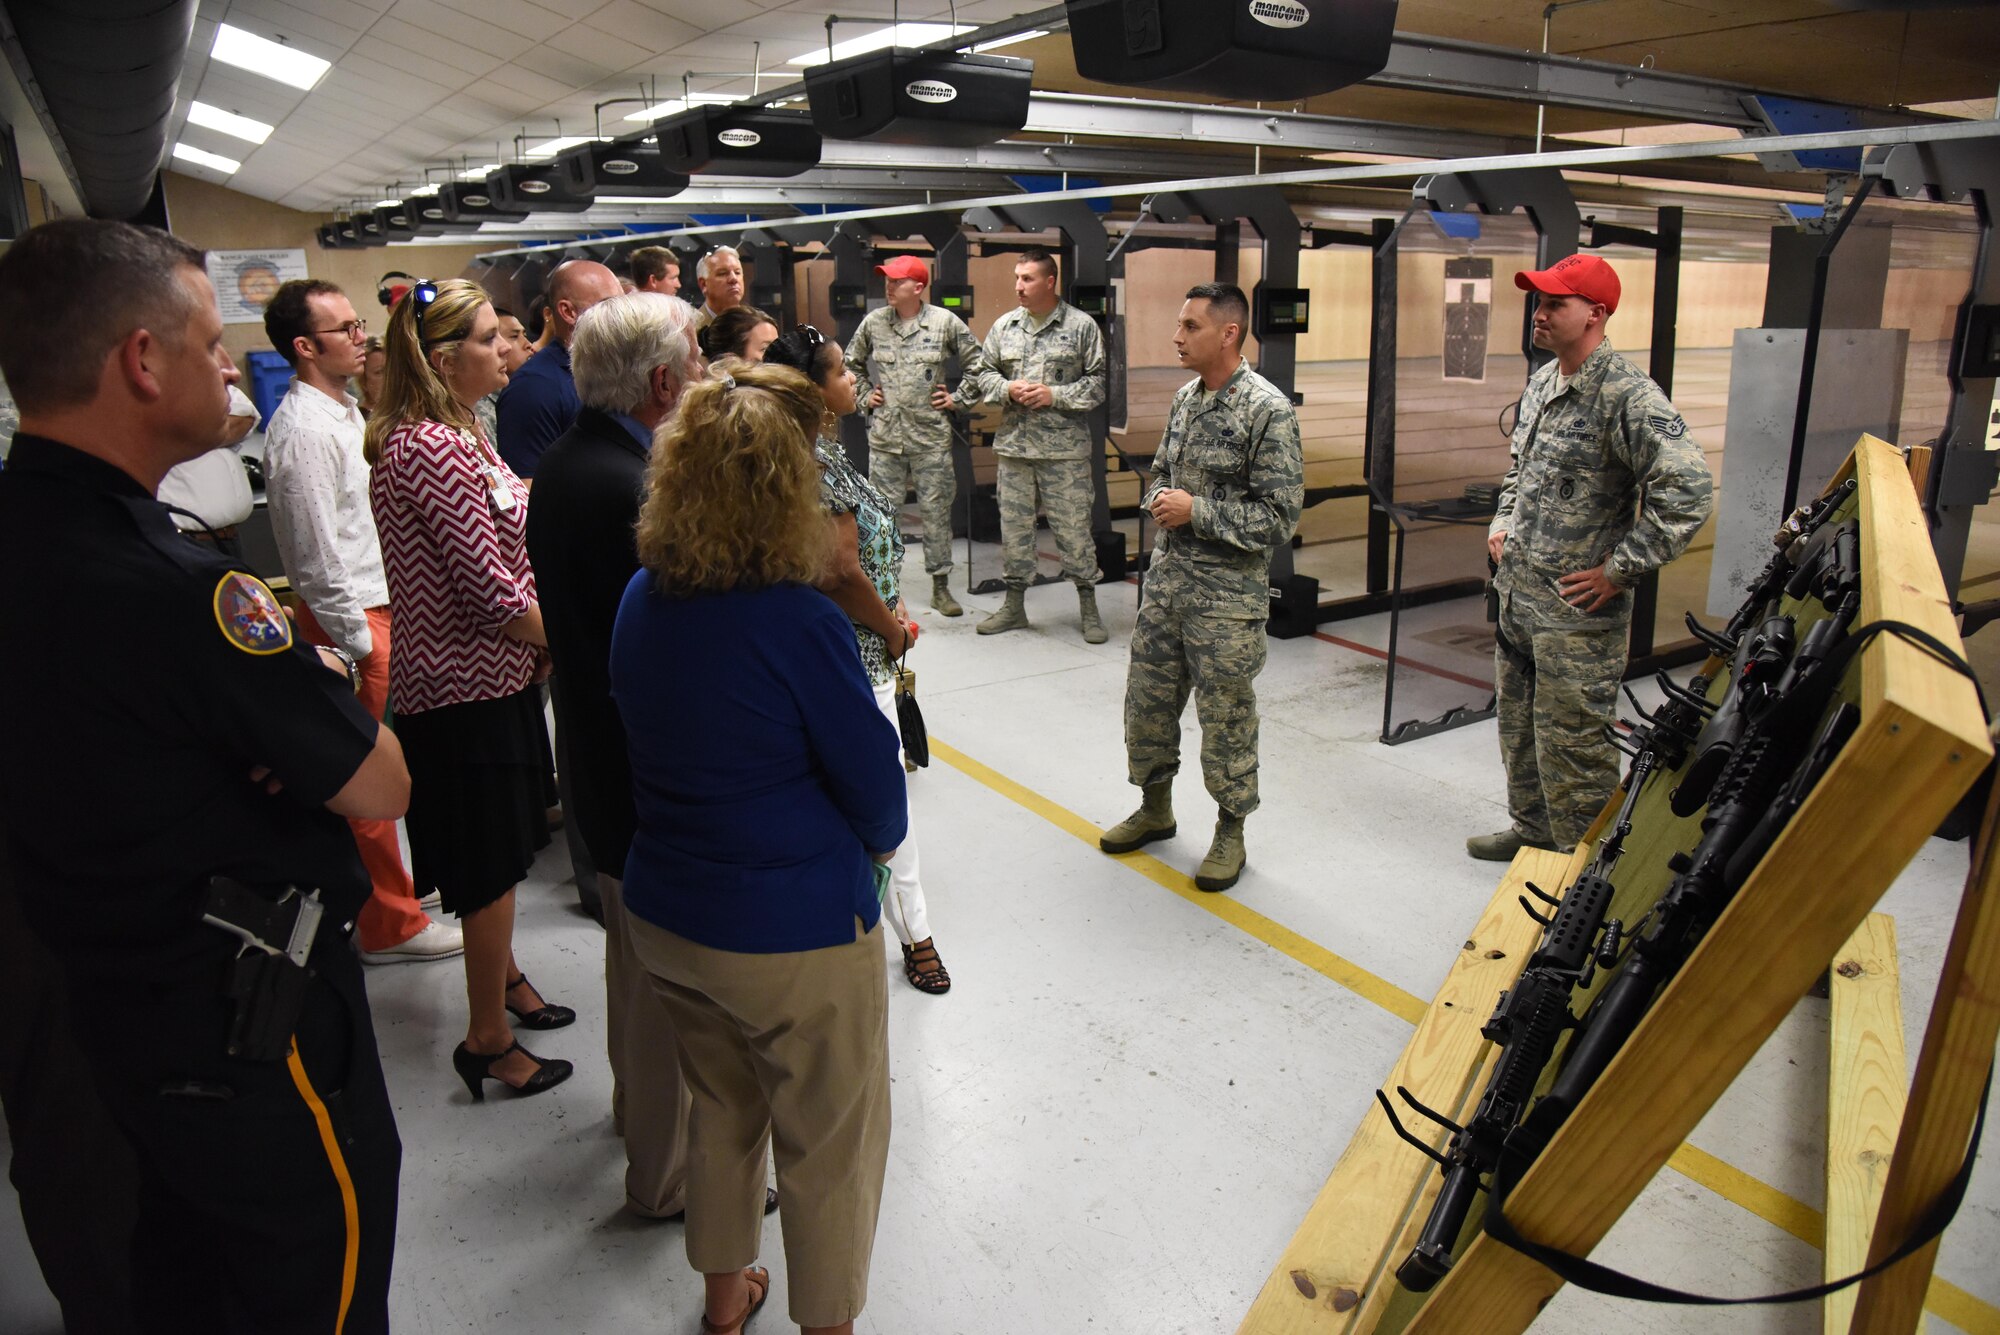 Maj. Jonathon Murray, 81st Security Forces Squadron commander, gives a briefing on the 81st SFS indoor firing range capabilities during an honorary commanders 81st Mission Support Group orientation tour Aug. 10, 2017, on Keesler Air Force Base, Miss. The honorary commander program is a partnership between base leadership and local civic leaders to promote strong ties between military and civilian leaders. (U.S. Air Force photo by Kemberly Groue)